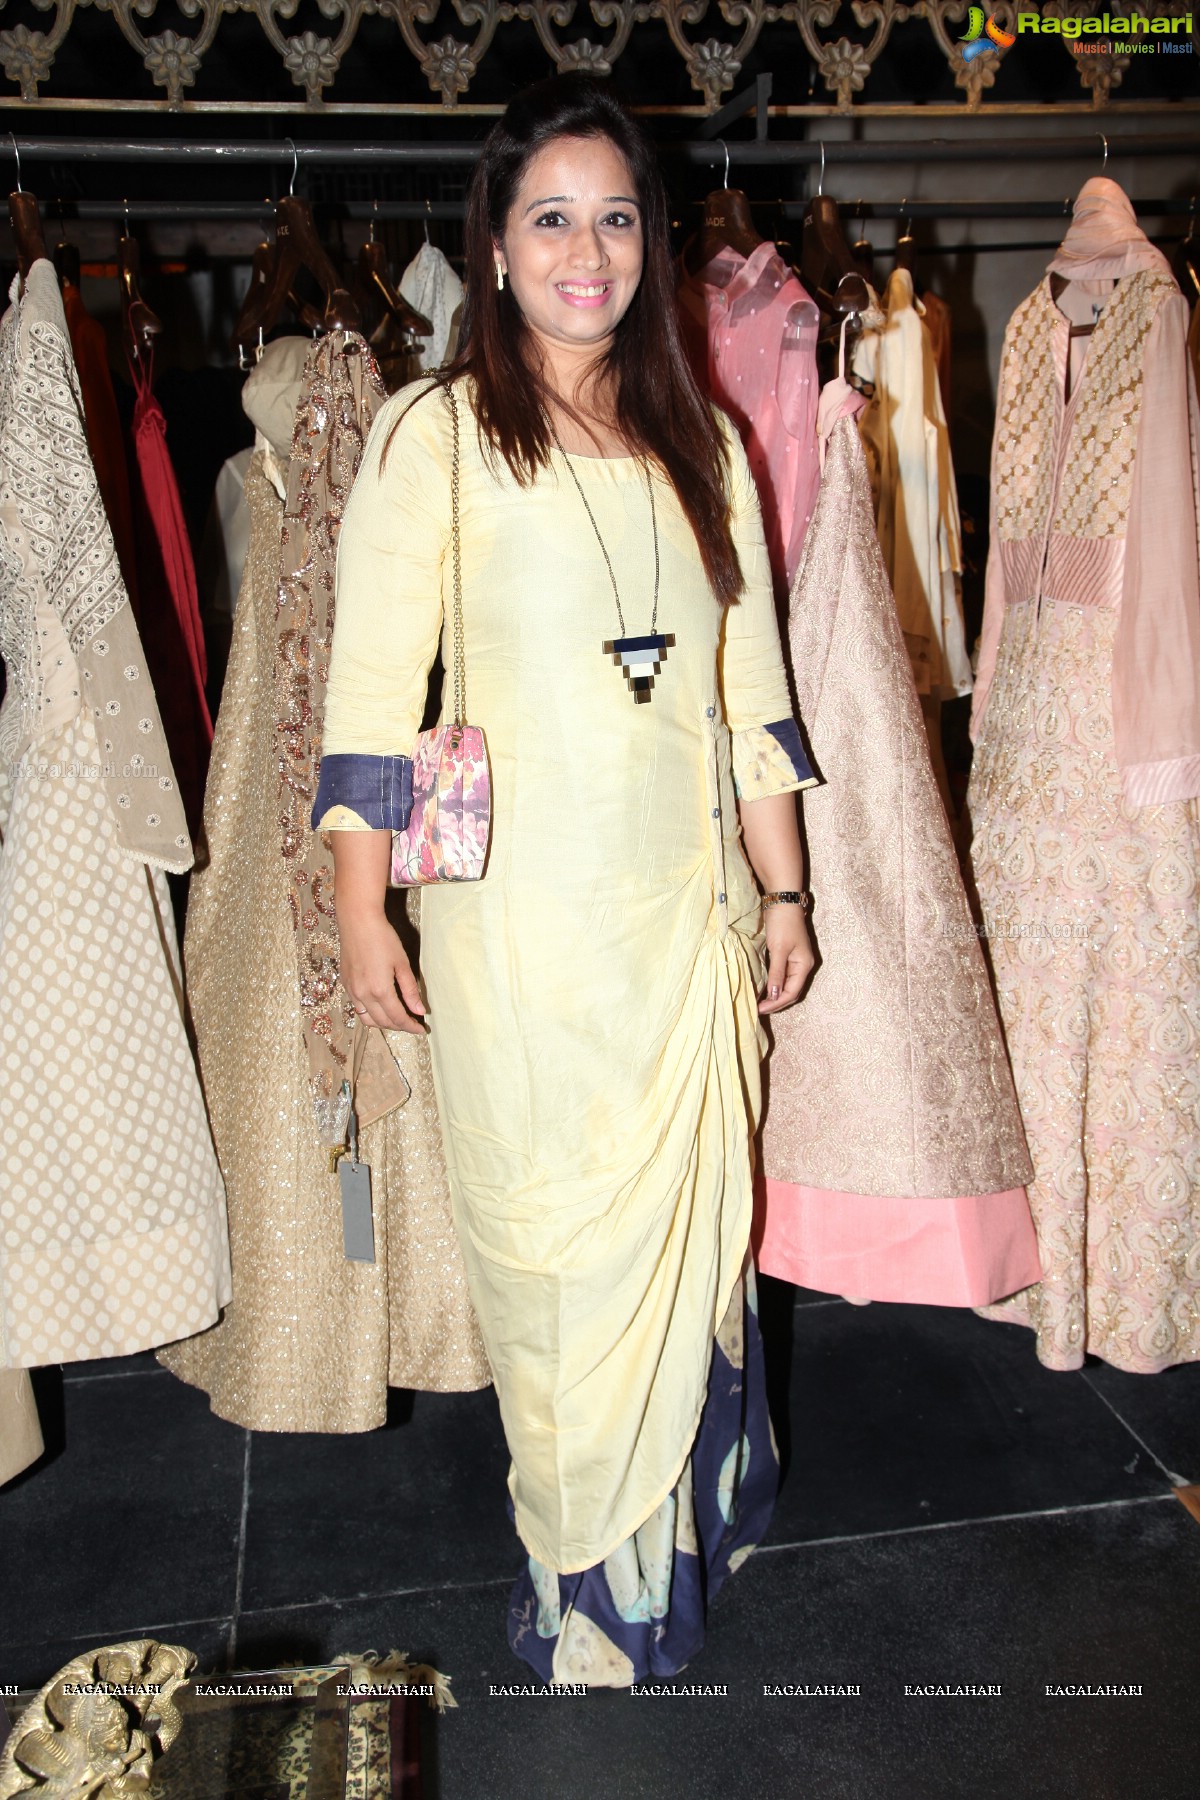 Pinky Reddy unveils Jade Brand by Mounica and Karishma at Beside Kalakriti Art Gallery, Hyderabad